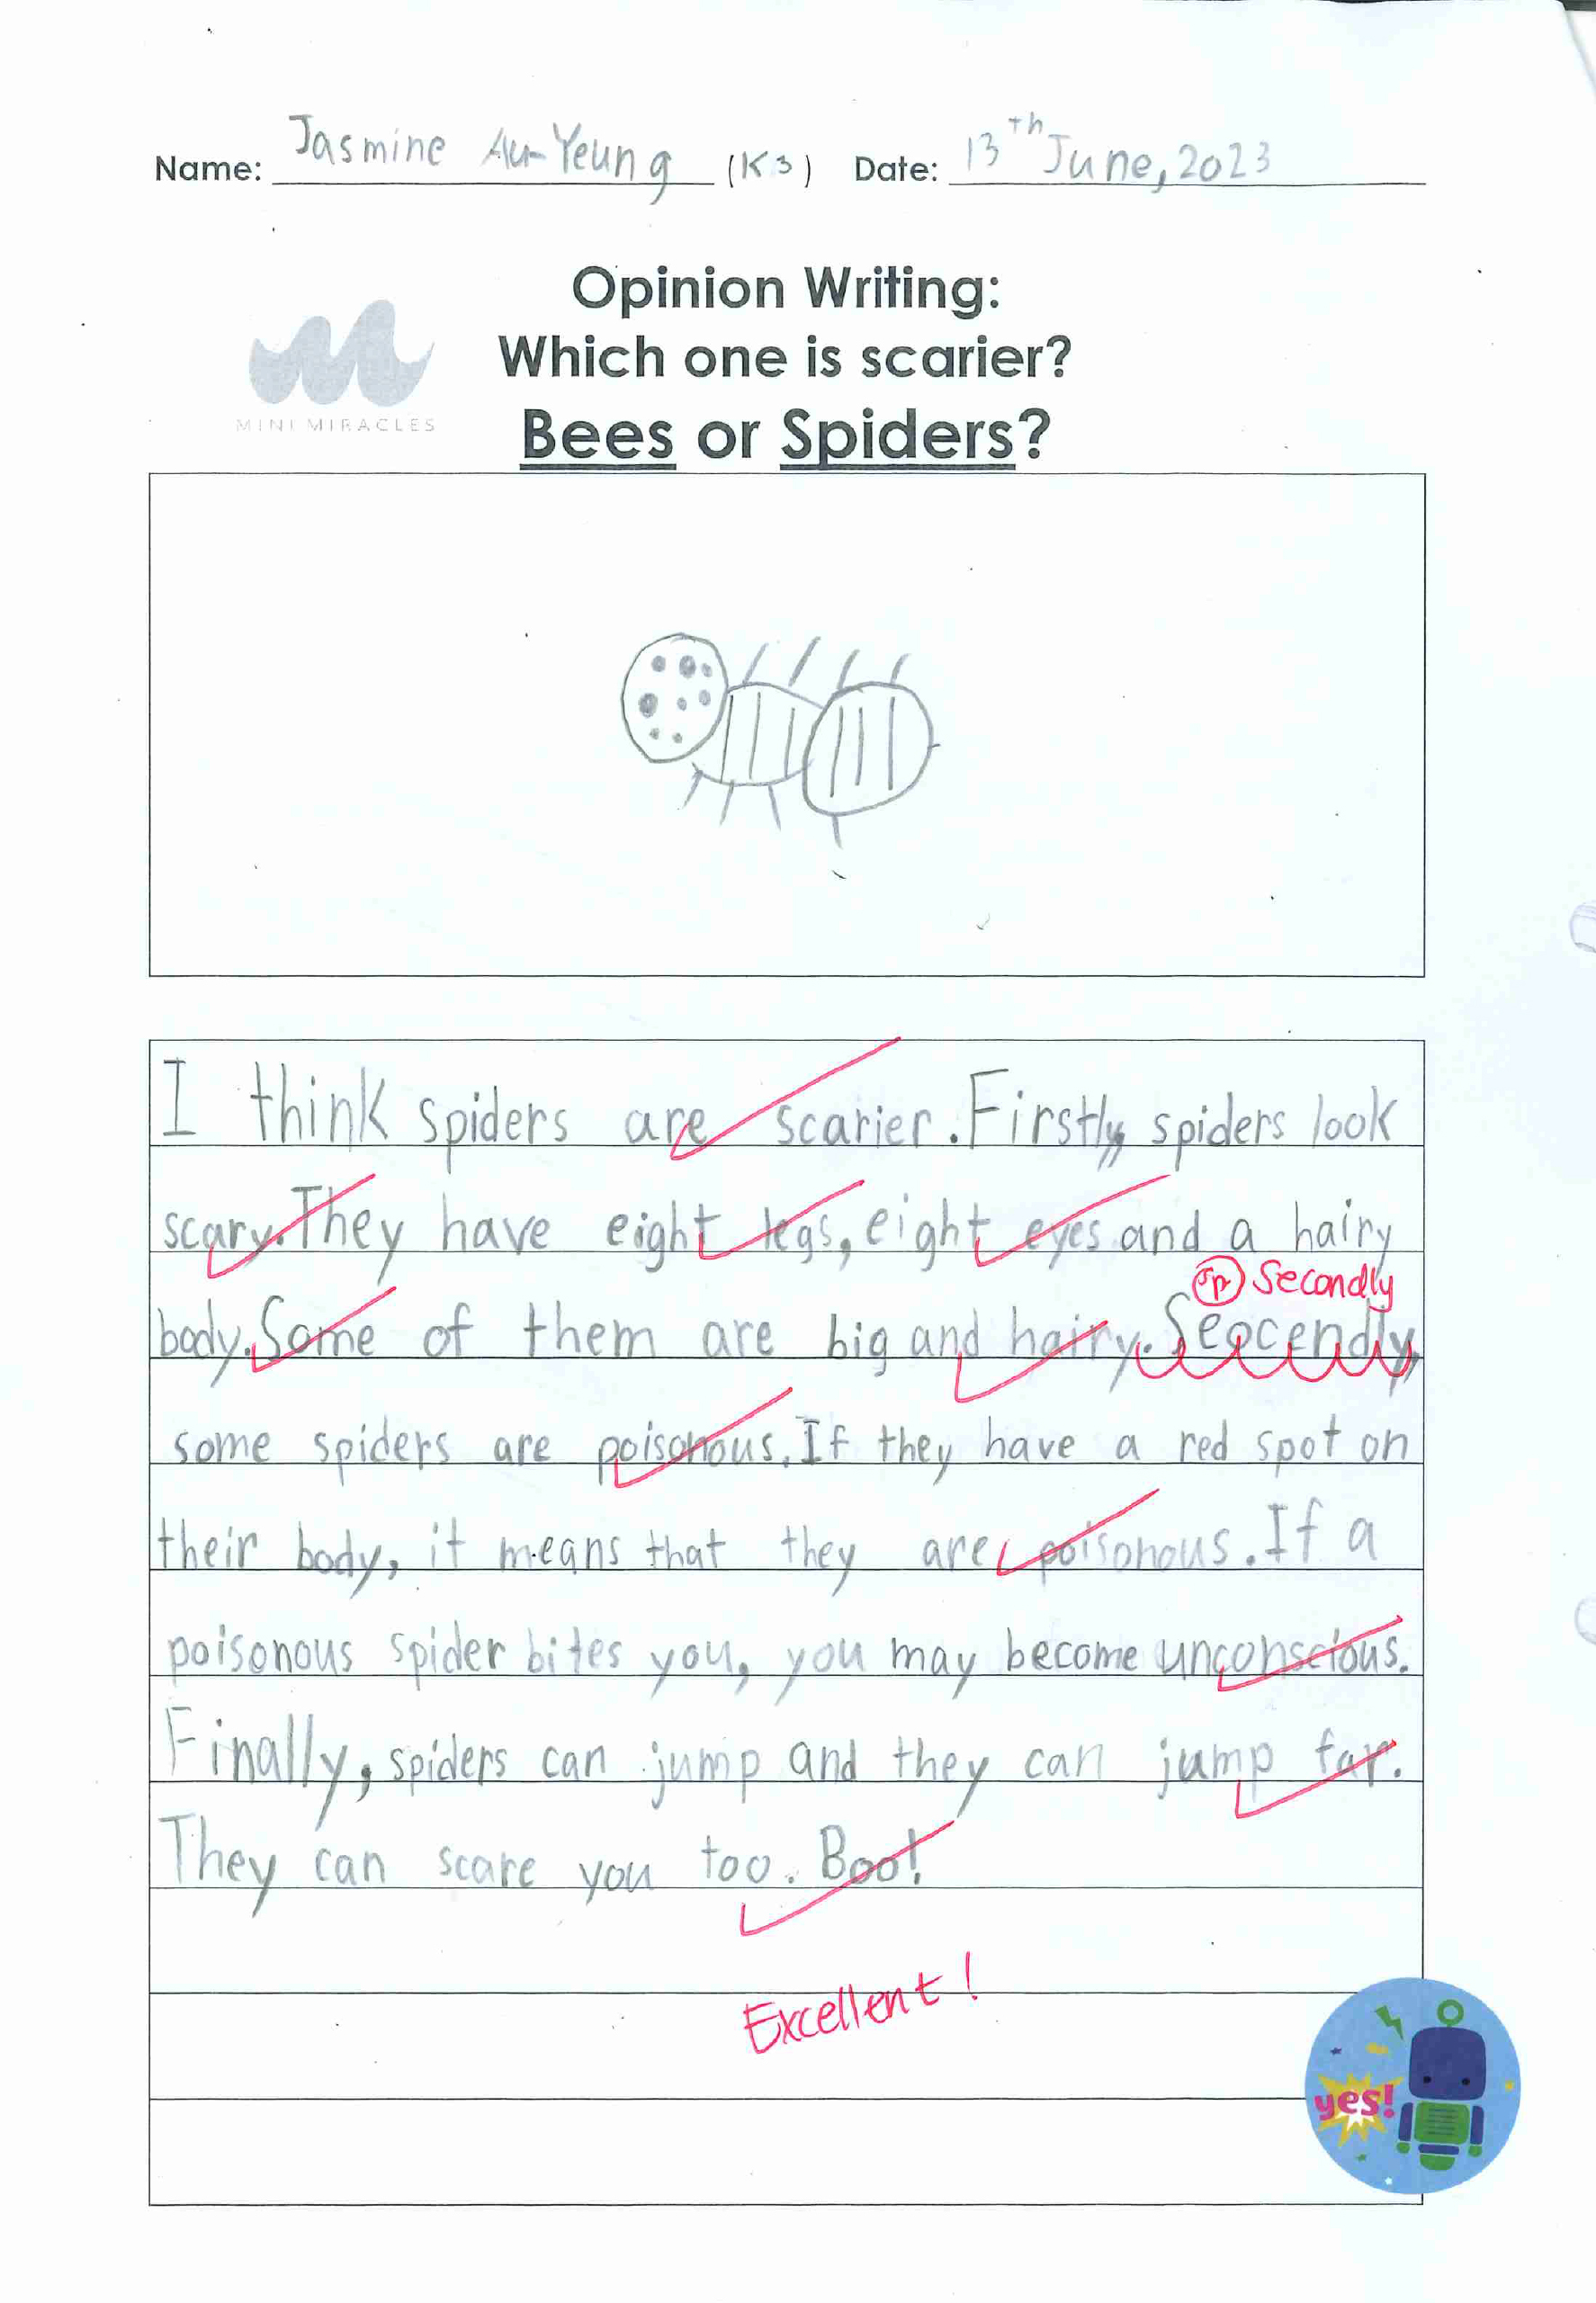 Jasmine Au Yeung – Which one is scarier Bees or Spiders